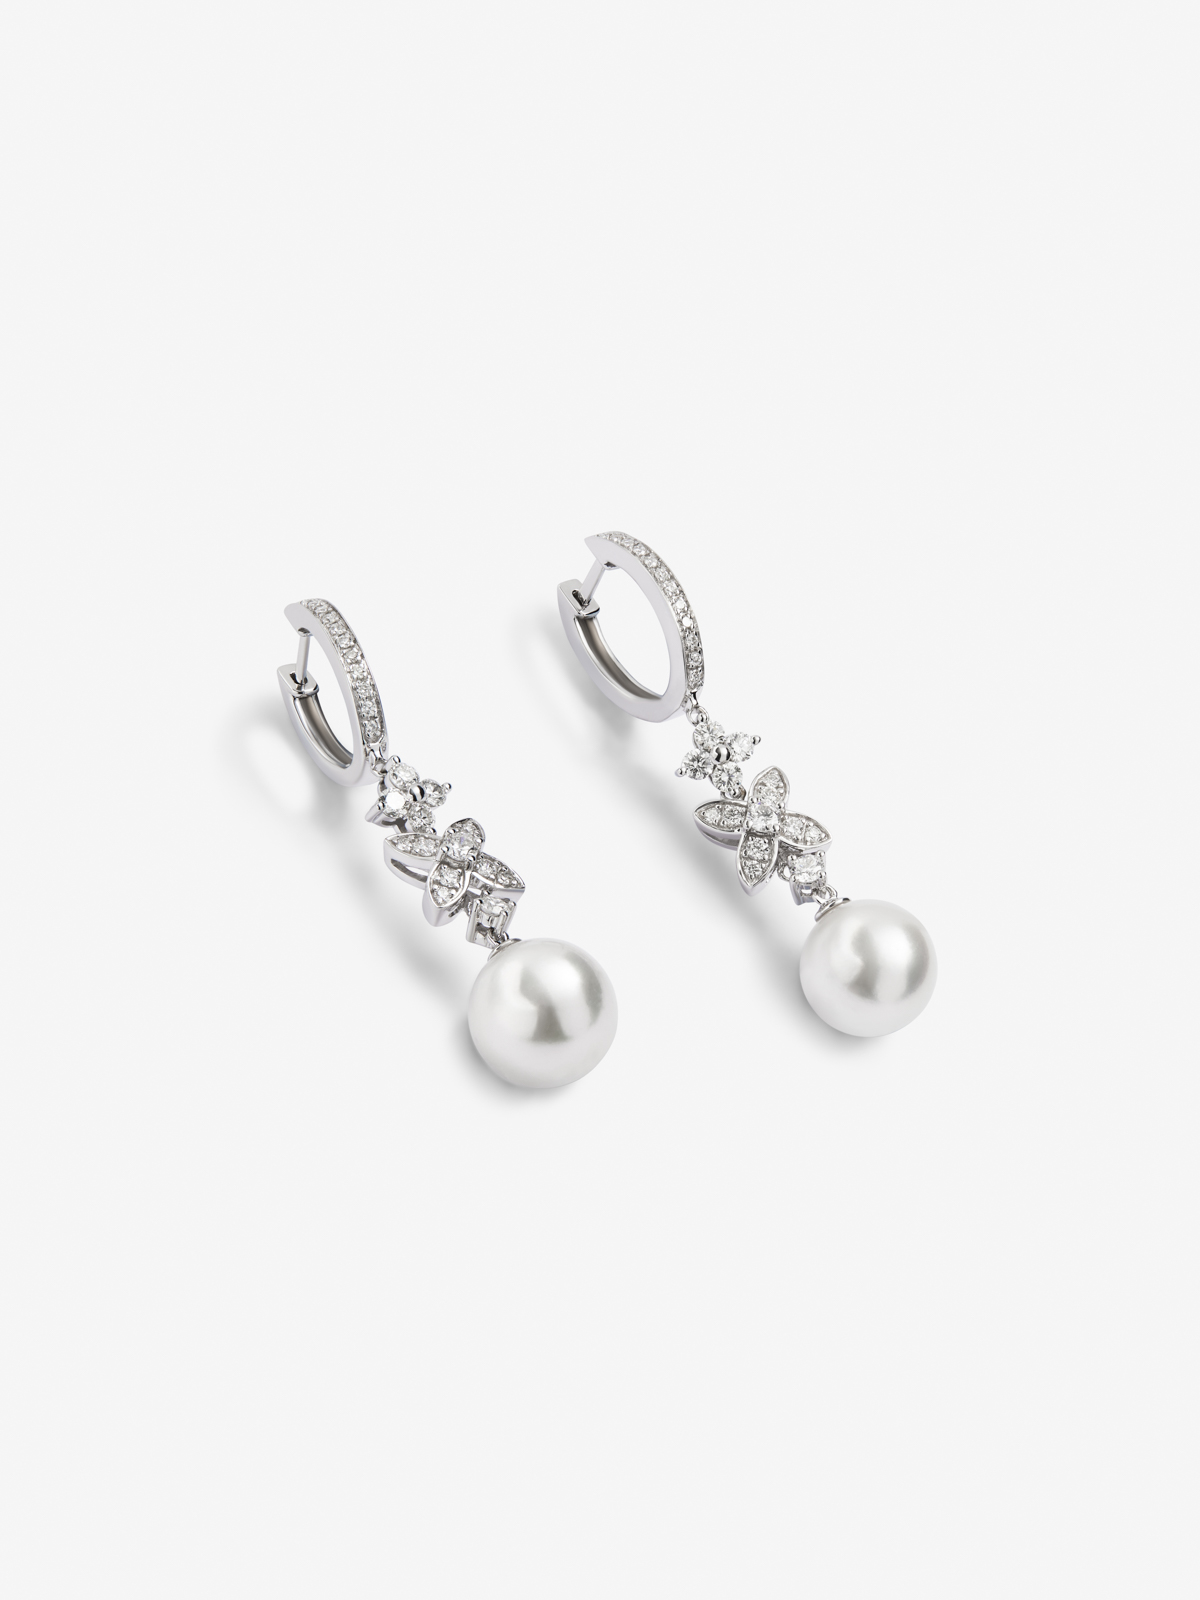 18K White Gold Earrings With Bright Size of 0.76 CTS and 8.5 mm pearls